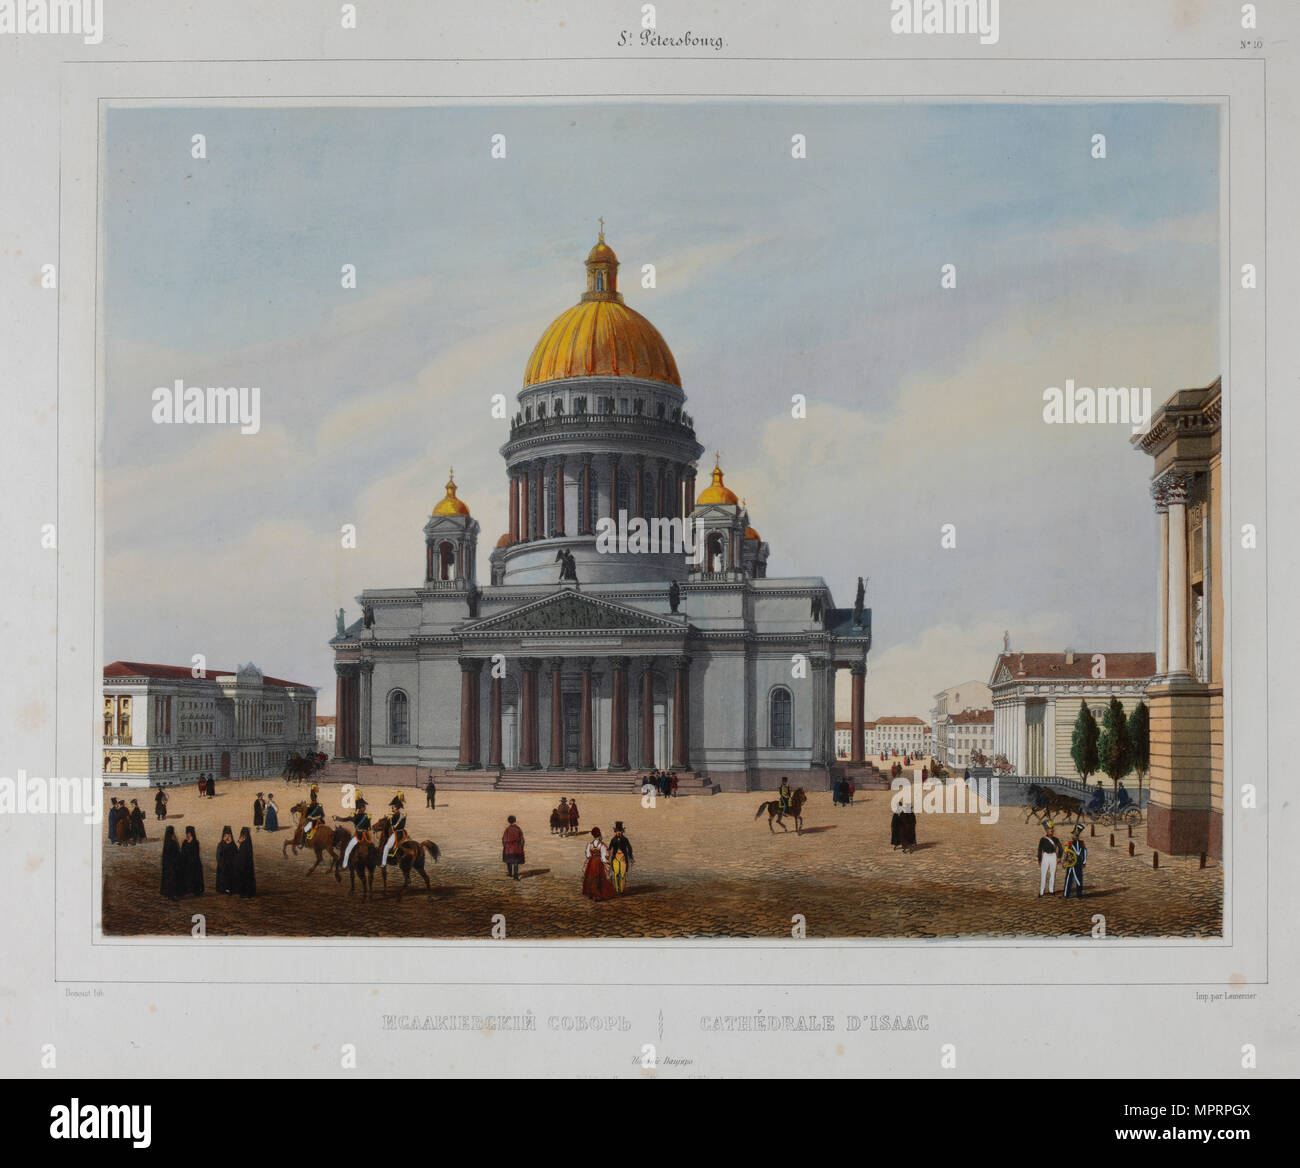 The Saint Isaac's Cathedral in Saint Petersburg, 1840s. Stock Photo